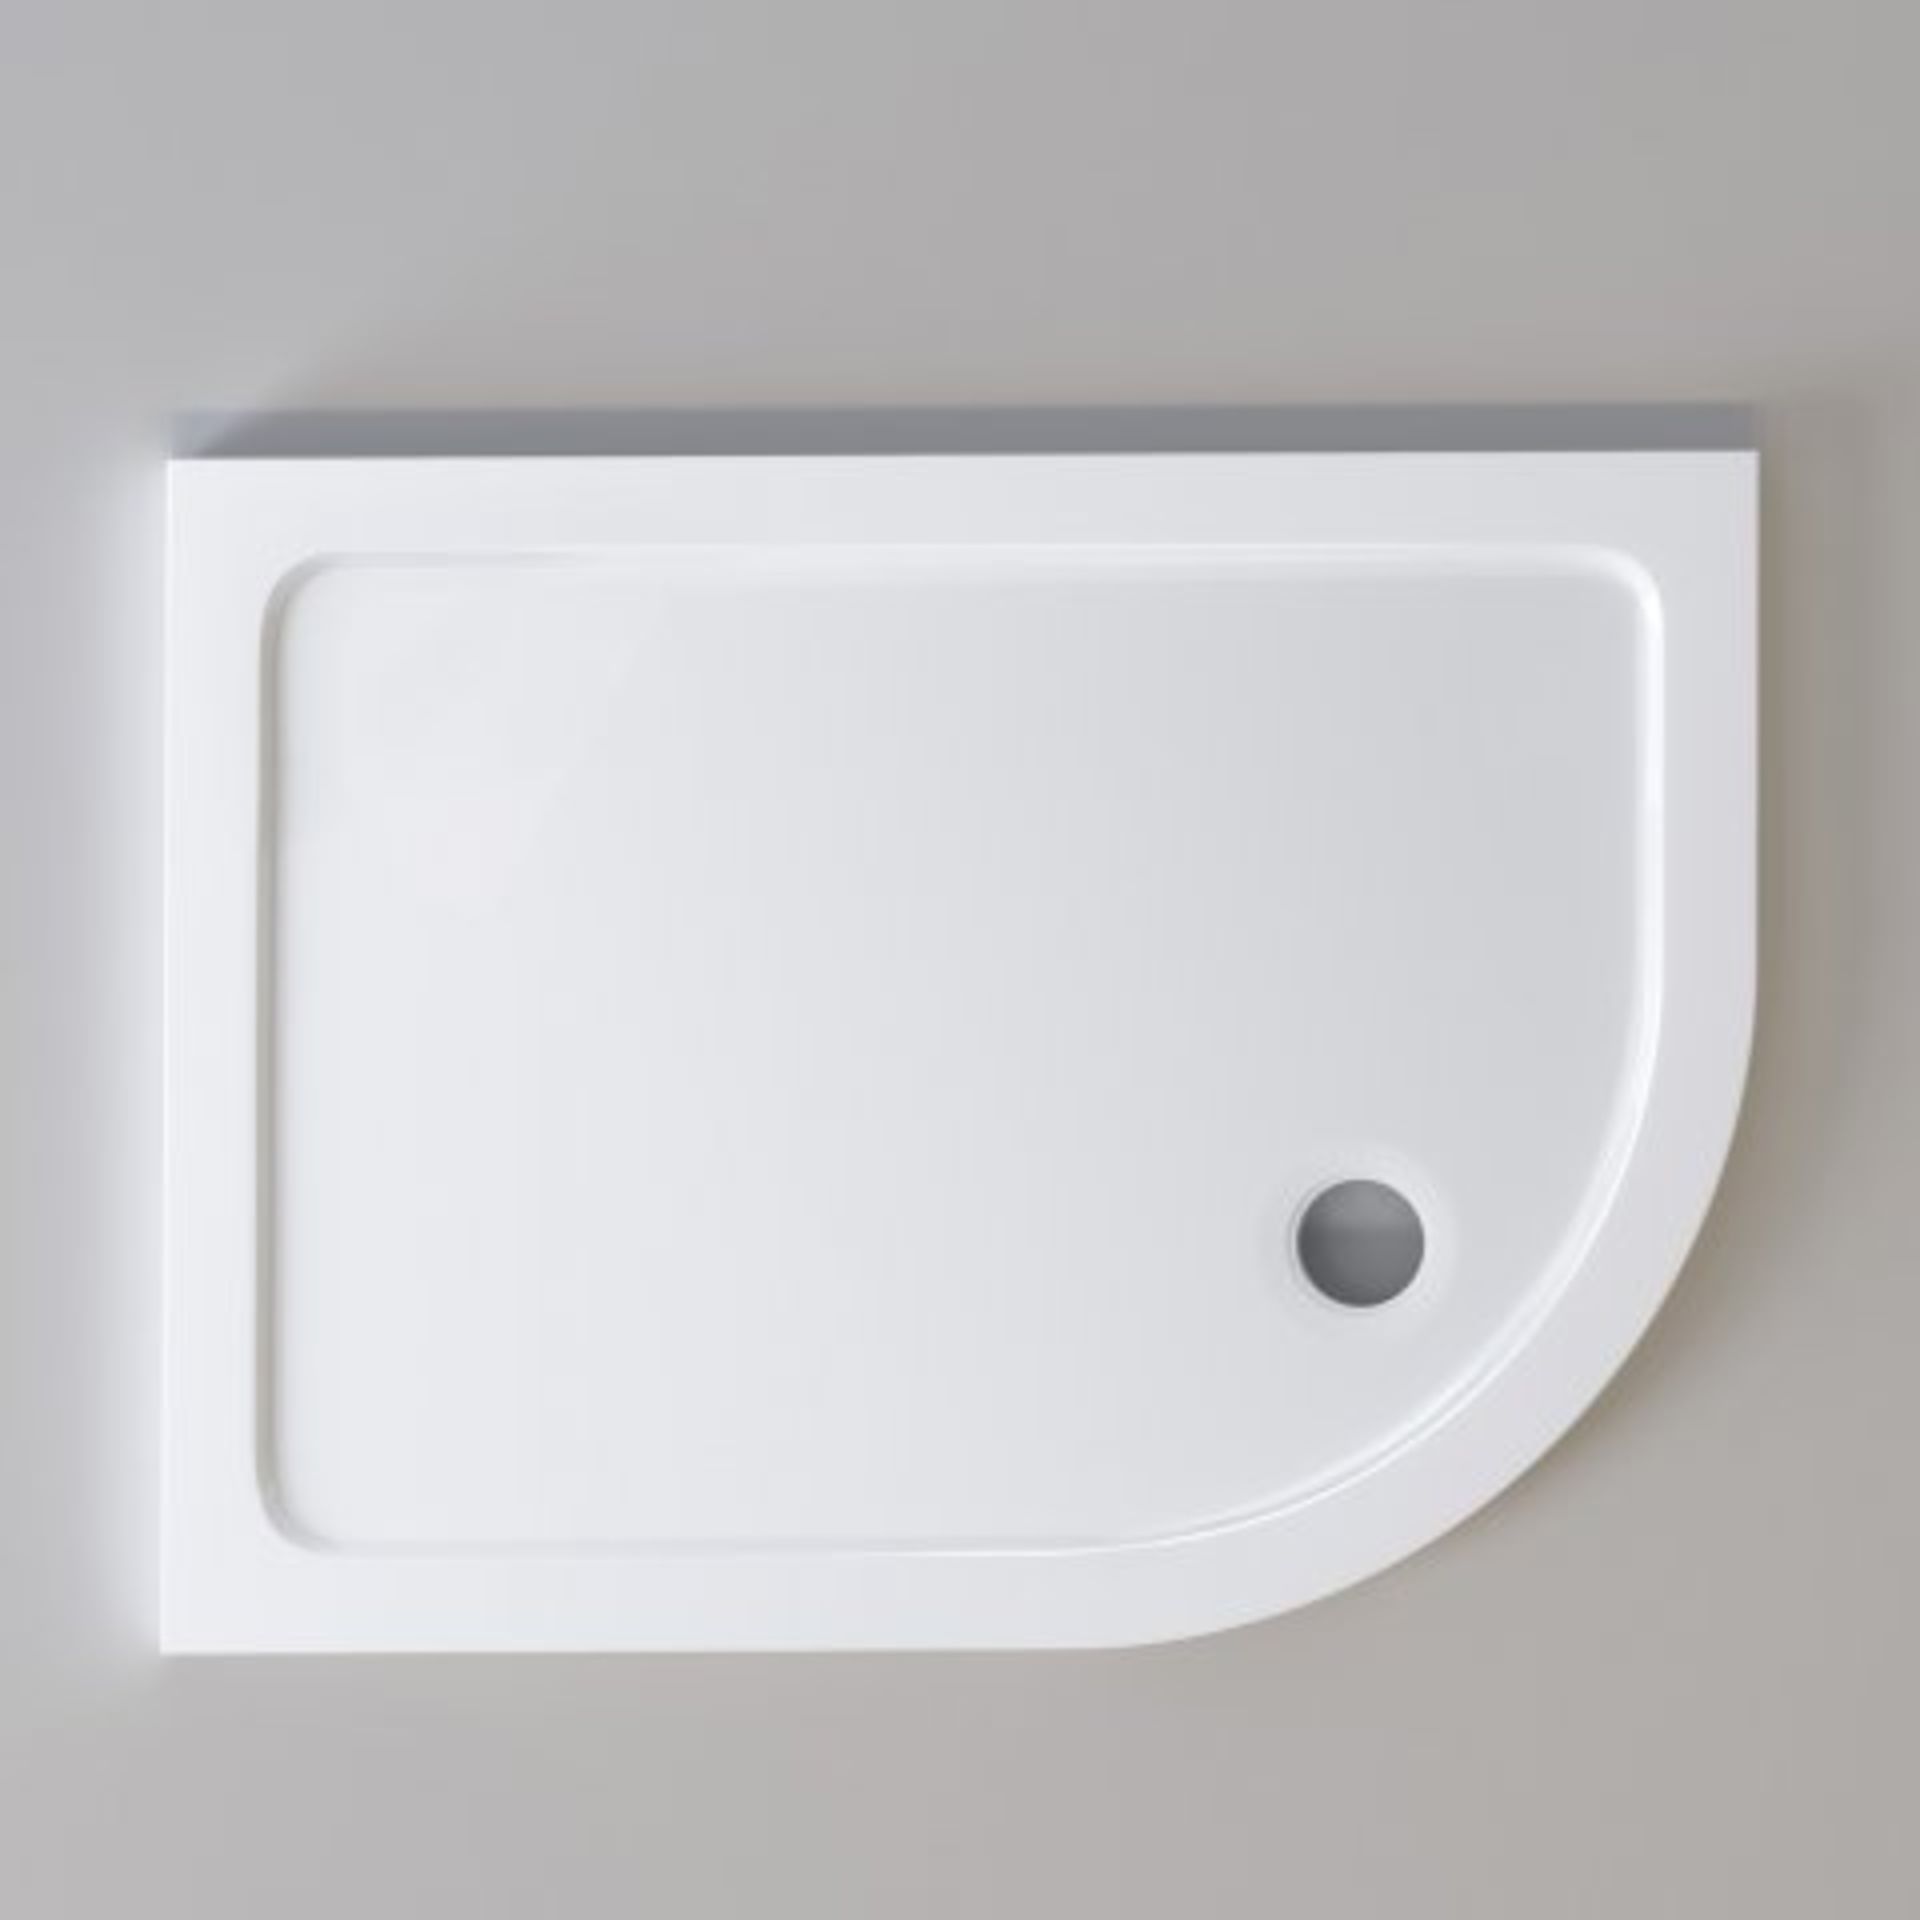 (O208) 1200x900mm Offset Quadrant Ultraslim Stone Shower Tray - Right. RRP £324.99. Magnificently - Image 2 of 2